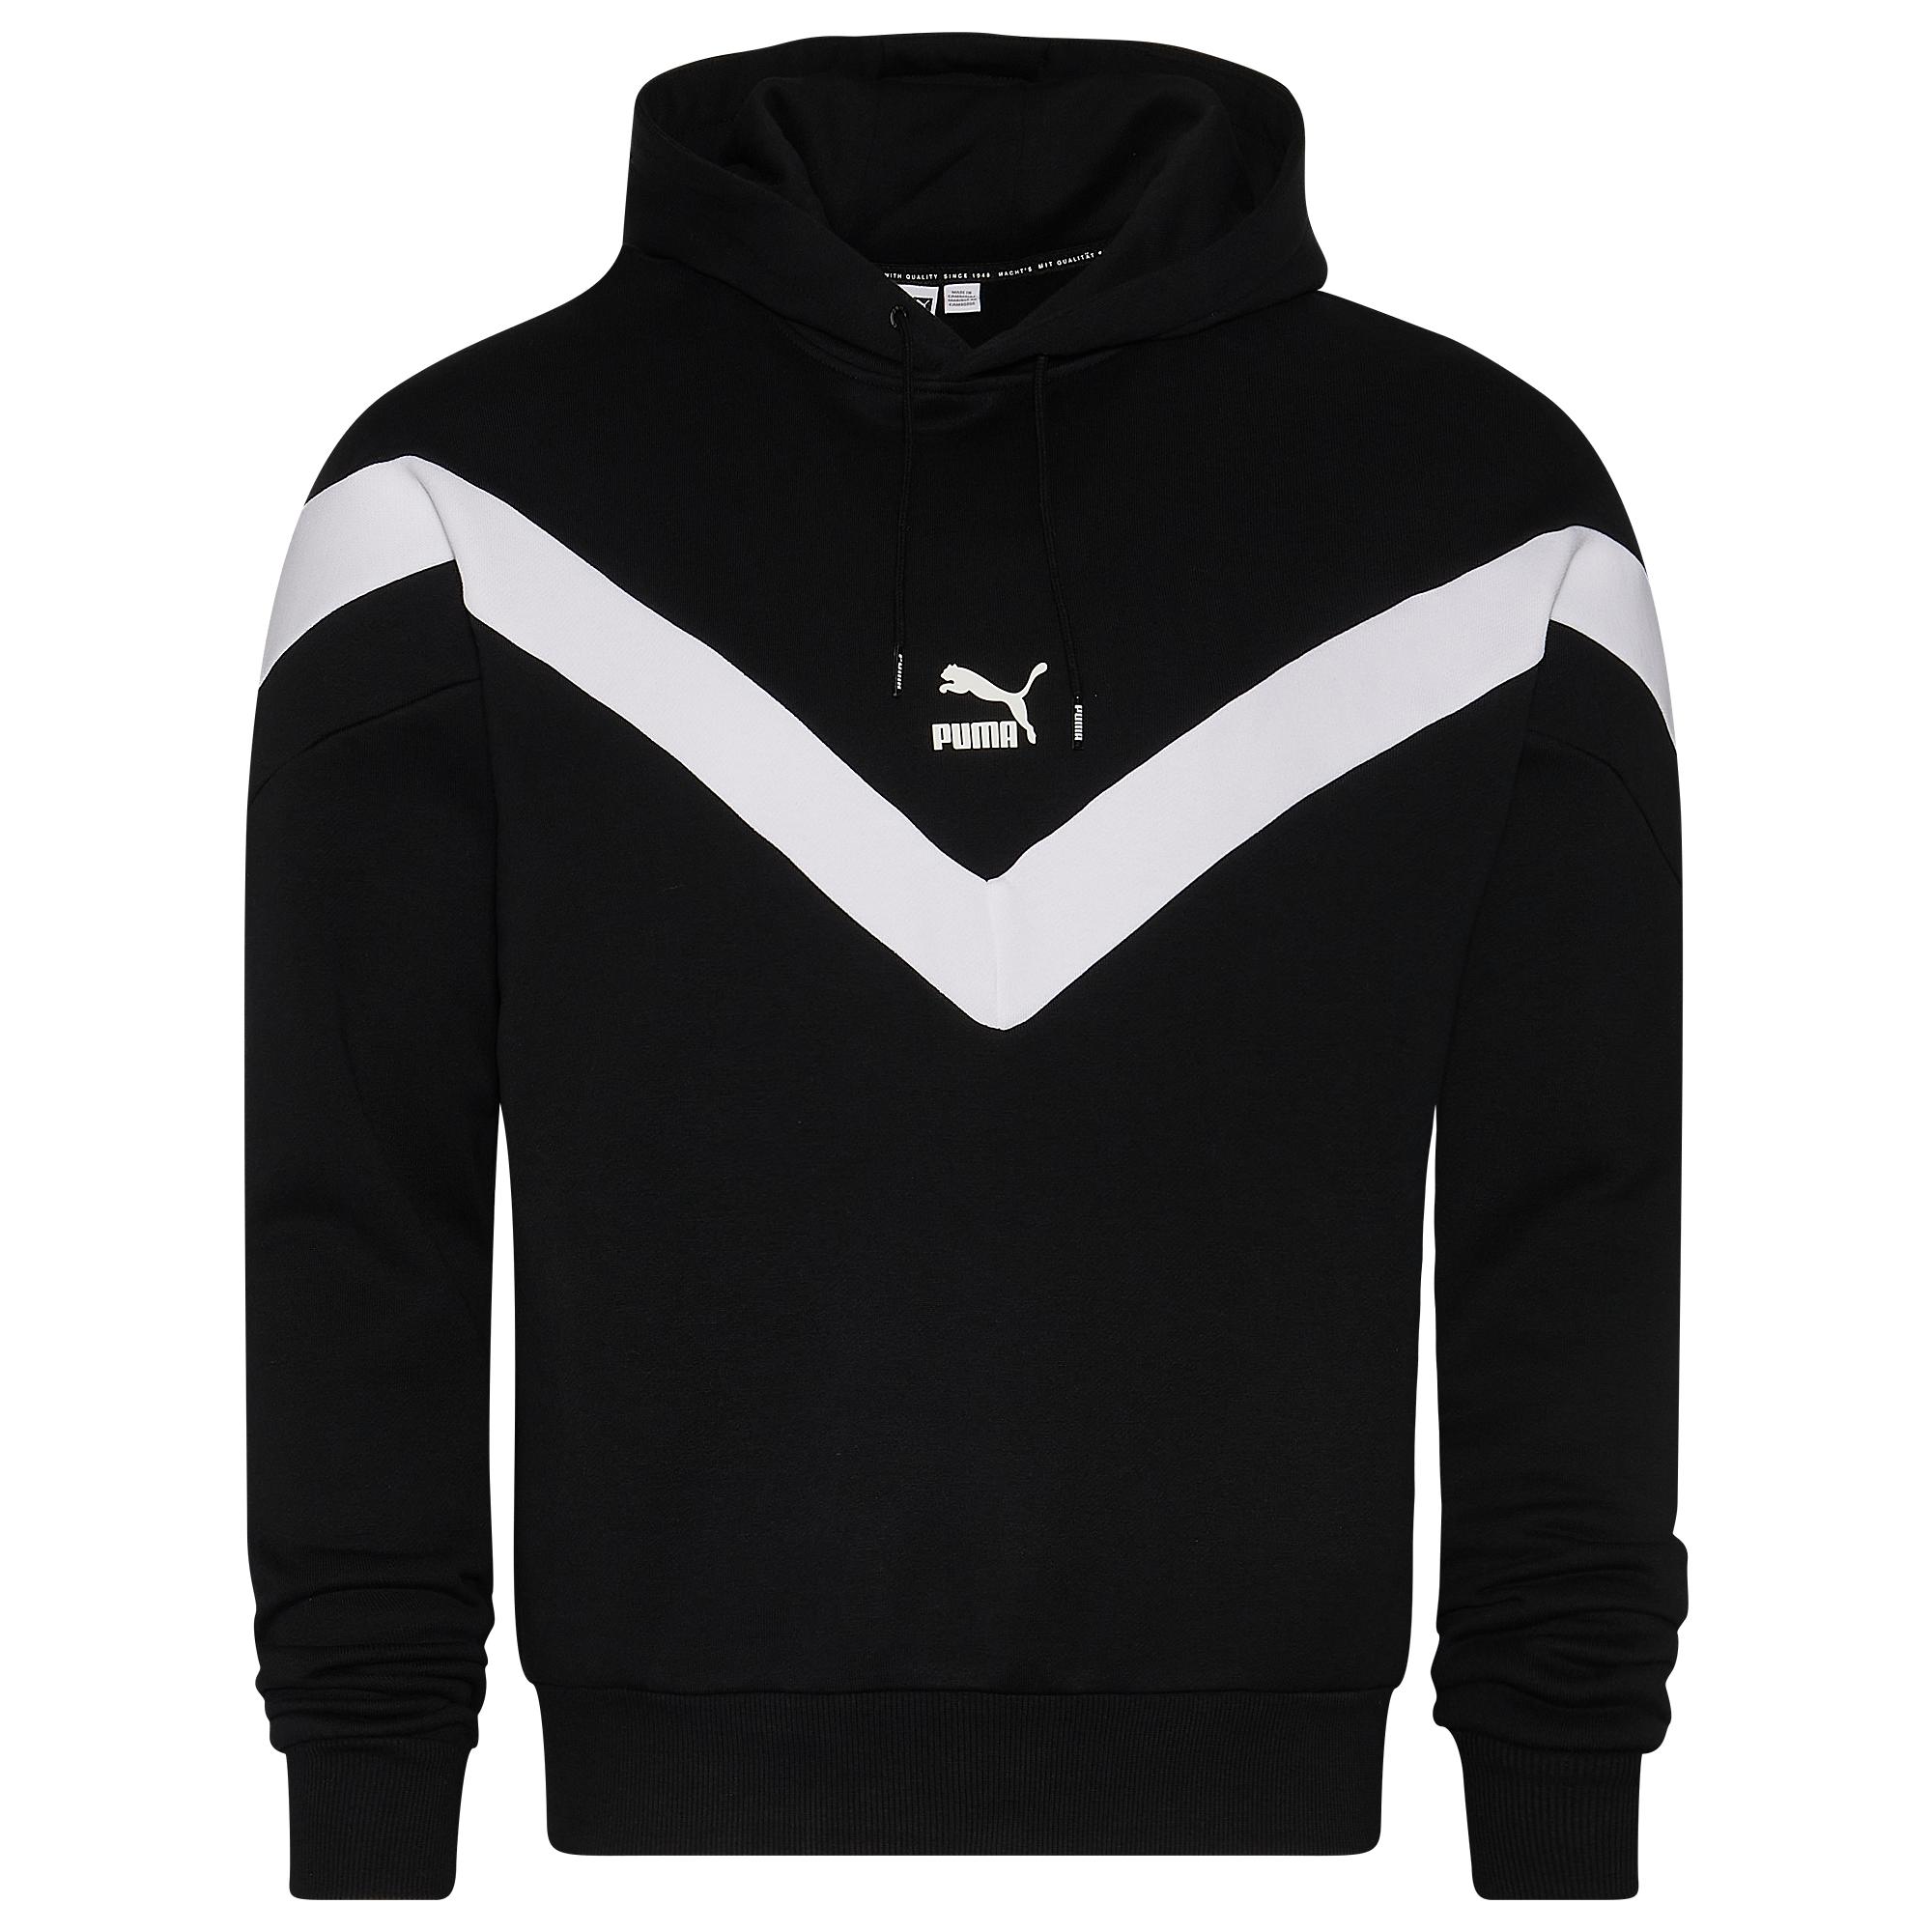 PUMA Cotton Iconic Hoodie in Black/White (Black) for Men - Lyst